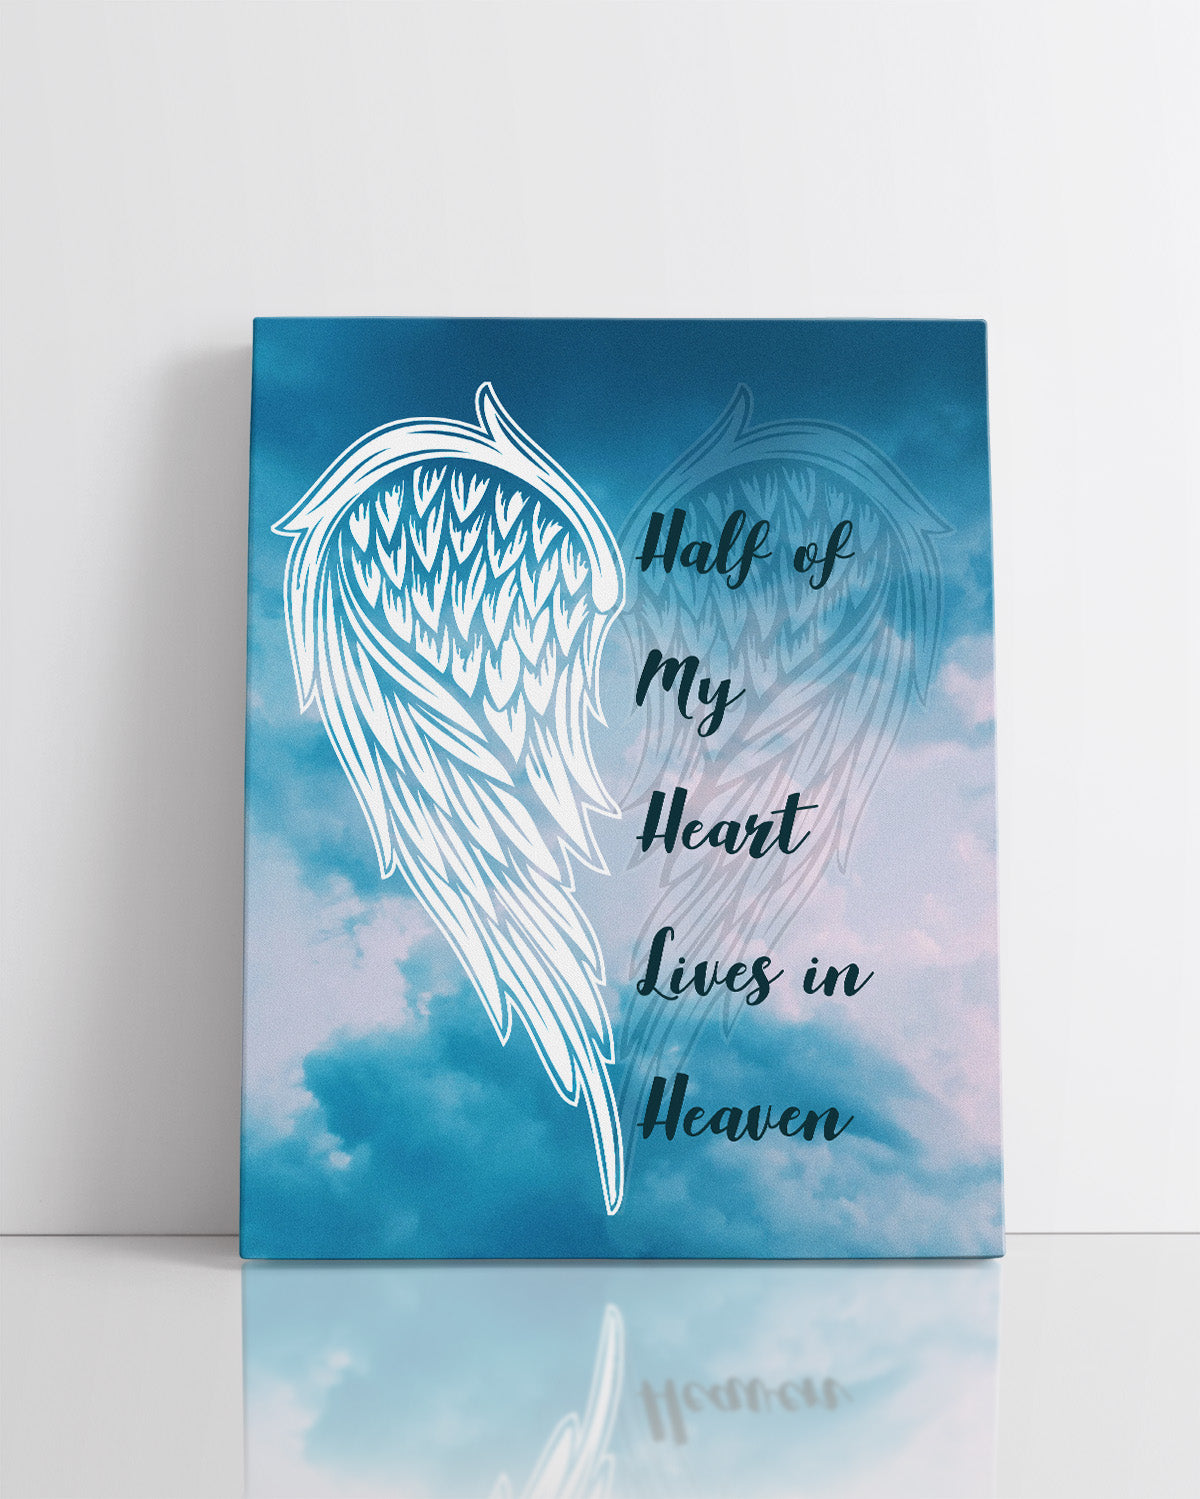 Half Of My Heart Lives In Heaven - Wall Decor Art Print with a sky background - artwork printed on canvas